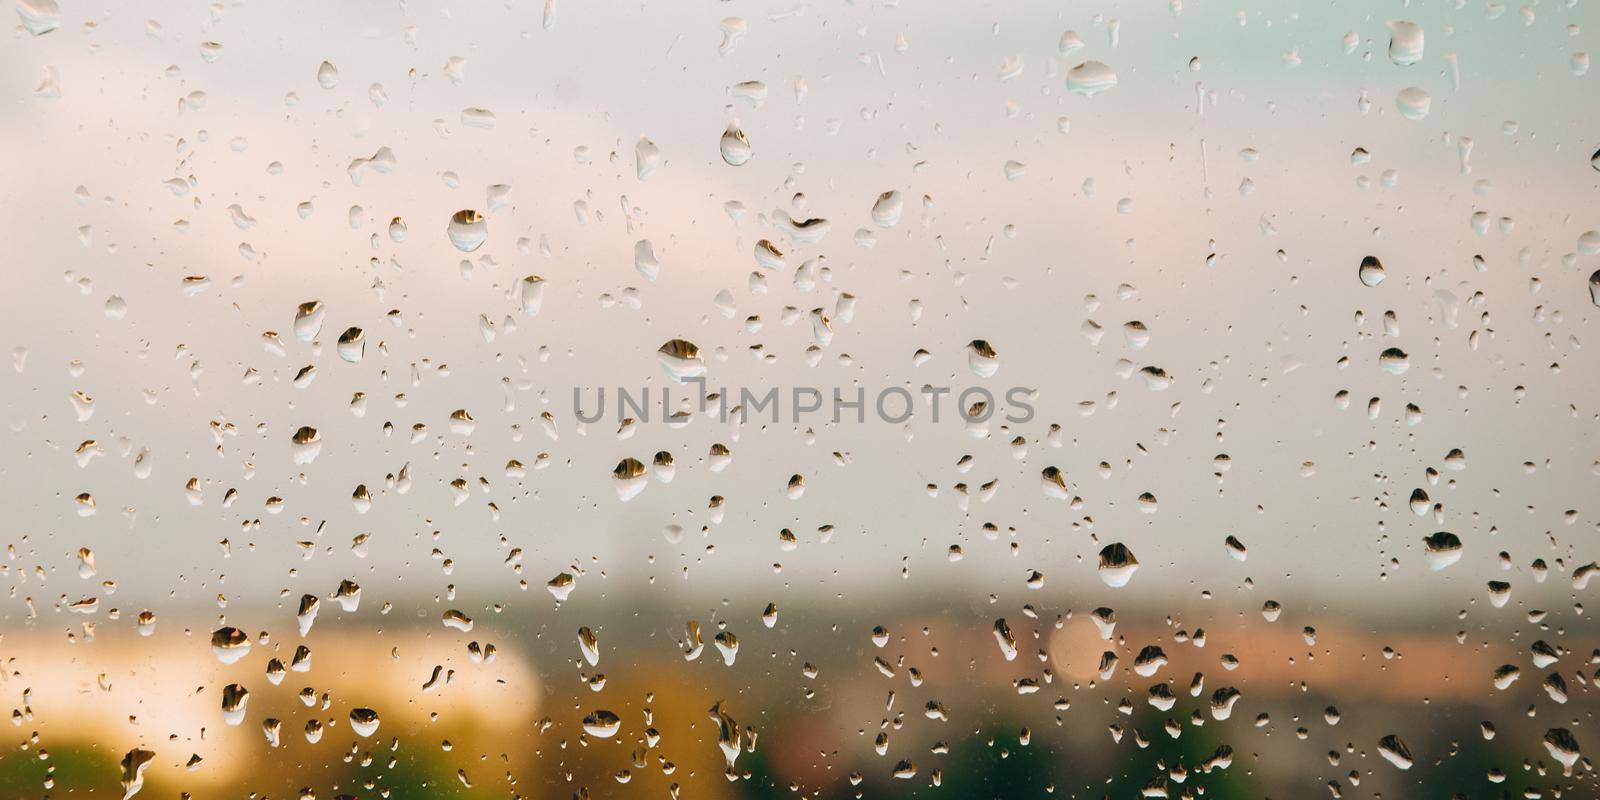 Drops of rain on the window. Rainy days in the city landscape. Defocused